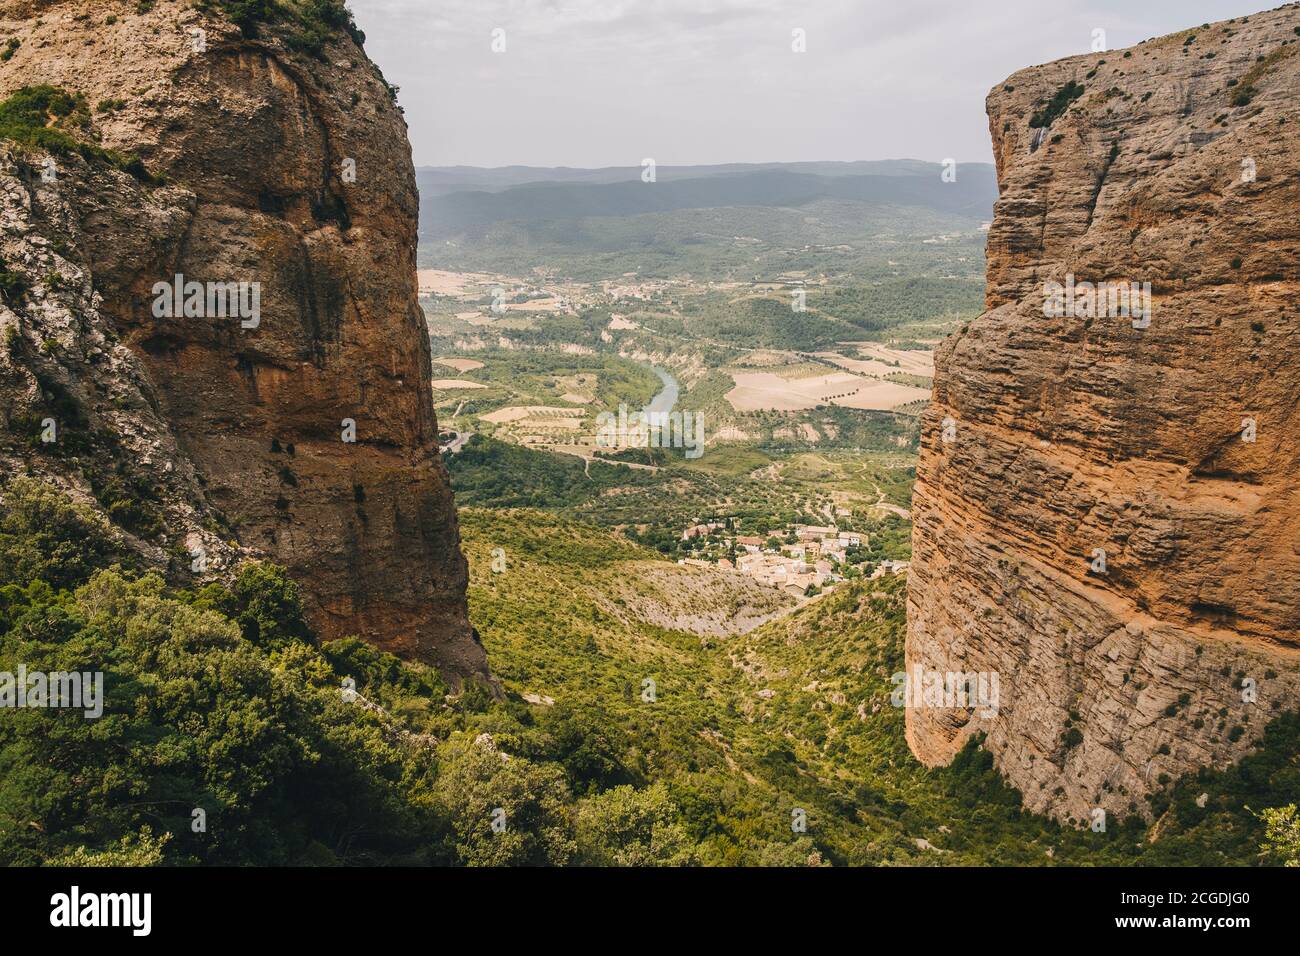 Riglos Village beneath the conglomerate rock formations of the Mallos de Riglos, Huesca, Aragon, Spain. About 300 meters below the viewpoint, located Stock Photo